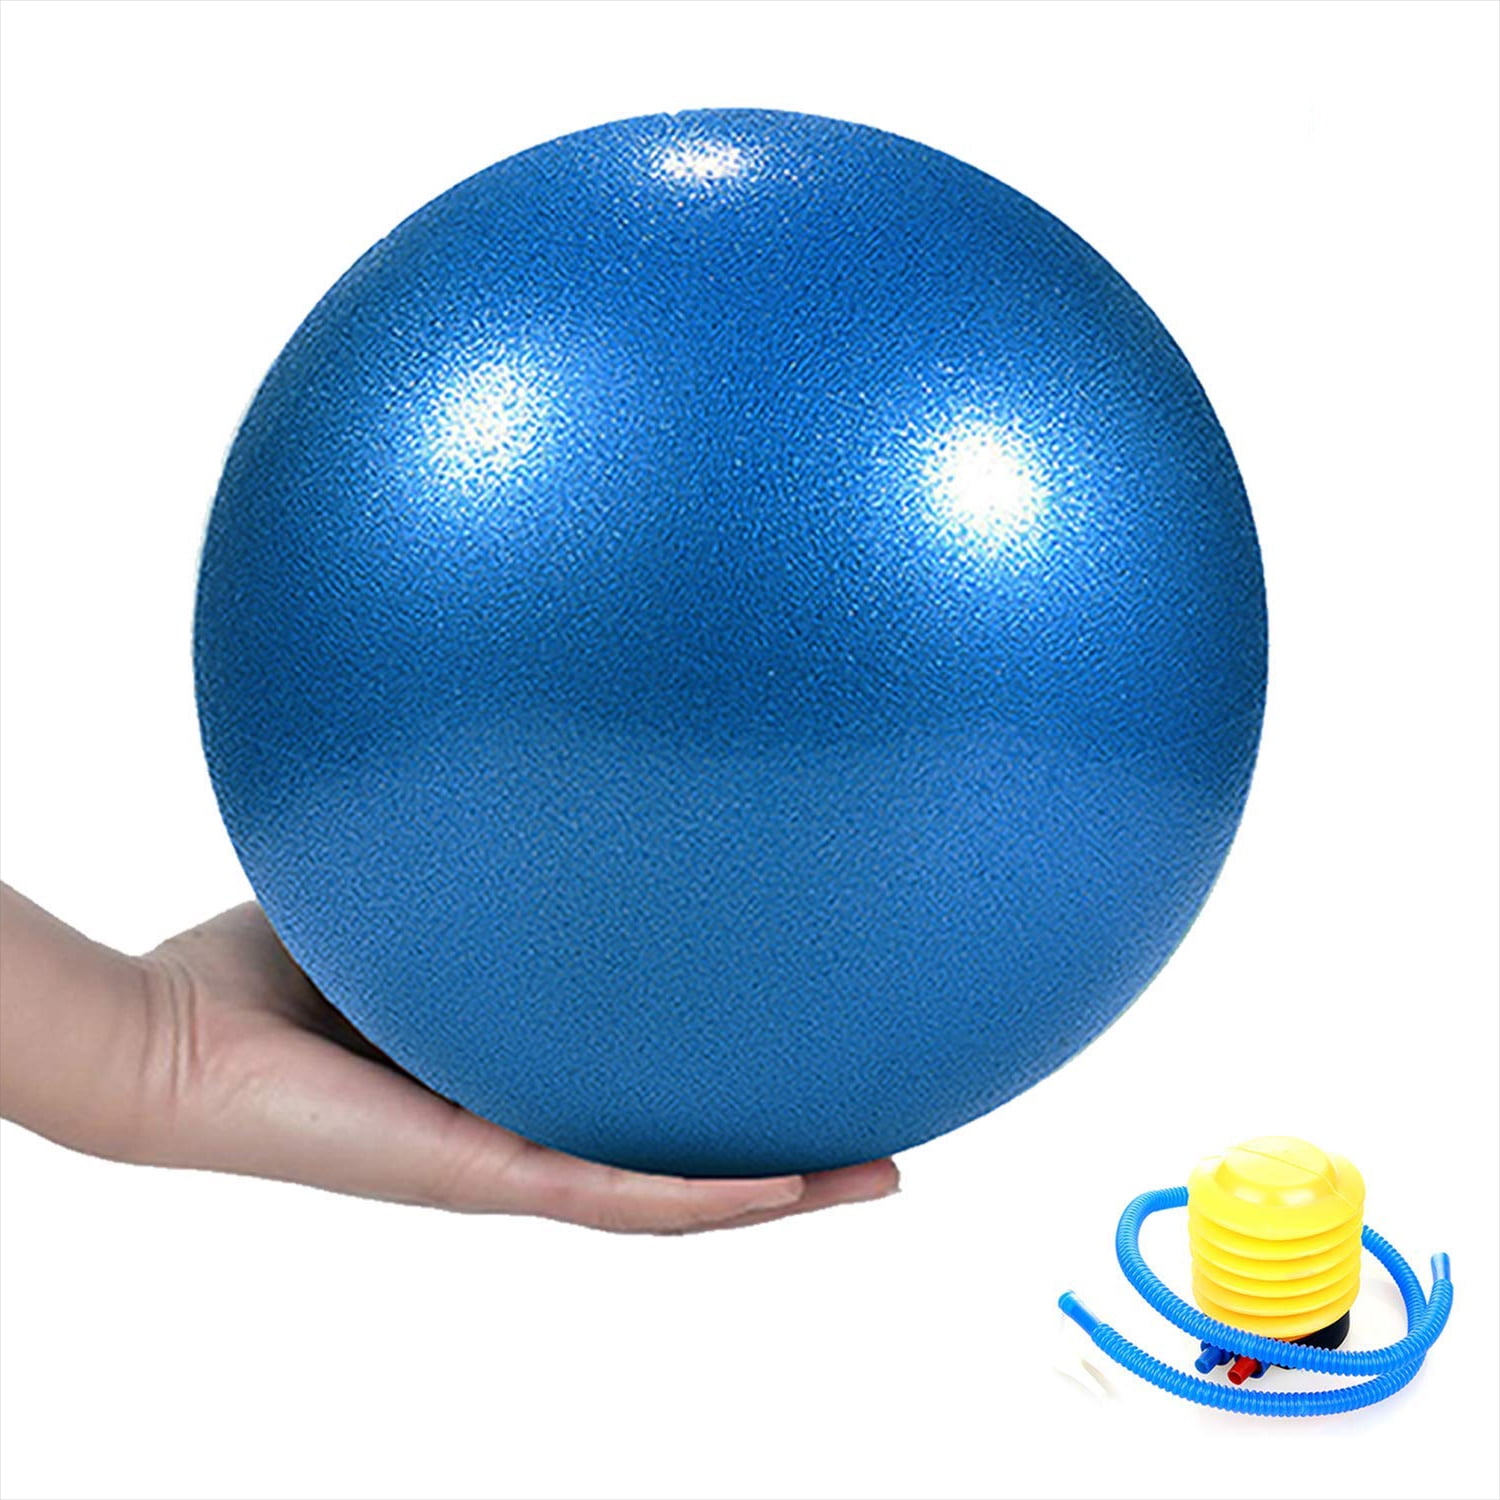 Details about   Mini Pilates Ball Yoga Small Exercise Ball Core Fitness Bender Yoga Stability 